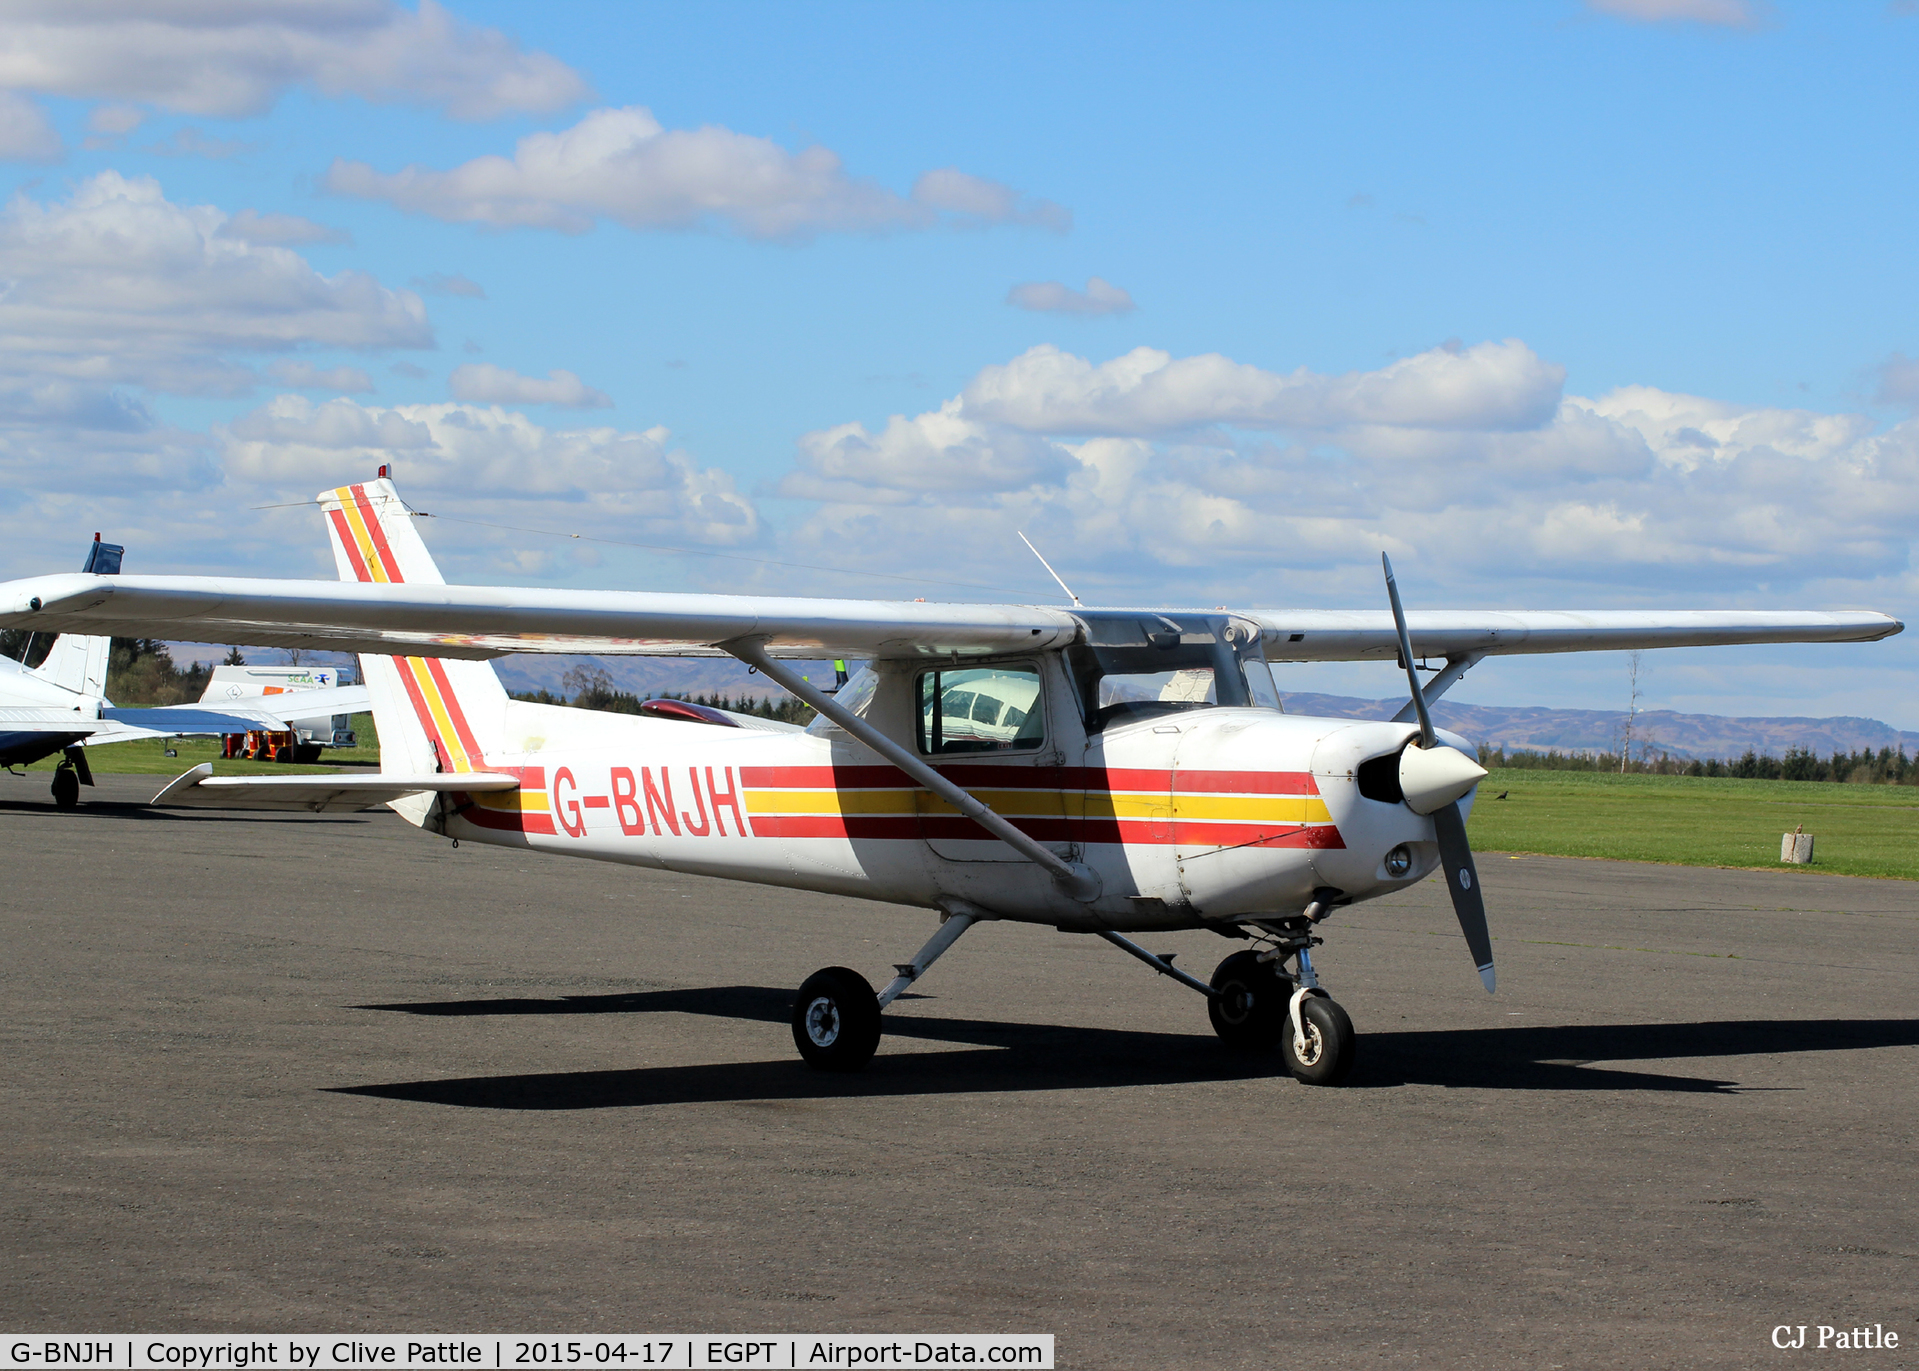 G-BNJH, 1982 Cessna 152 C/N 152-85401, Parked in the sun at Perth EGPT